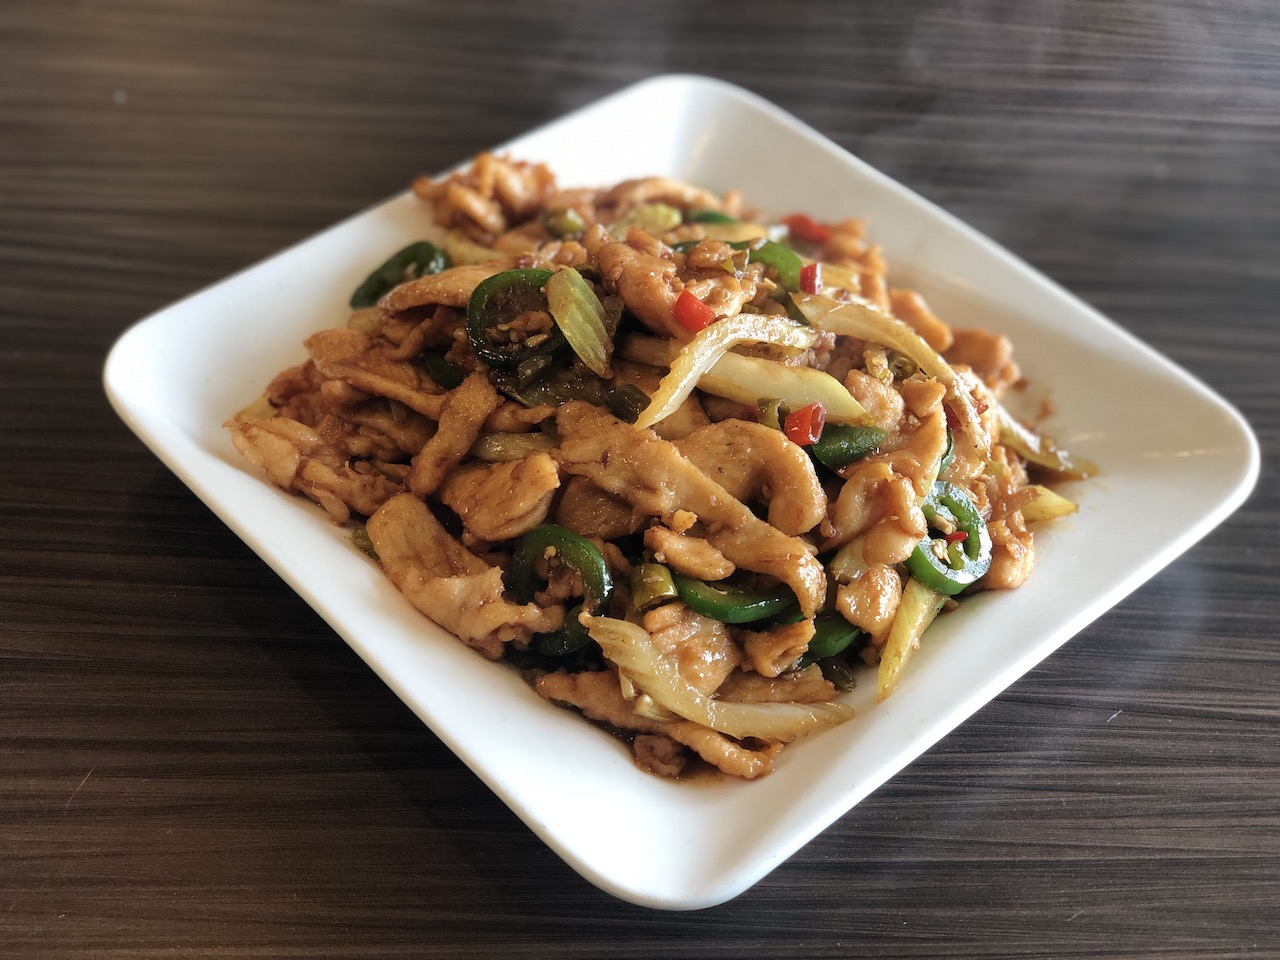 Stir Fried Chicken with Pickled Chili 泡椒鸡--Extra Spicy